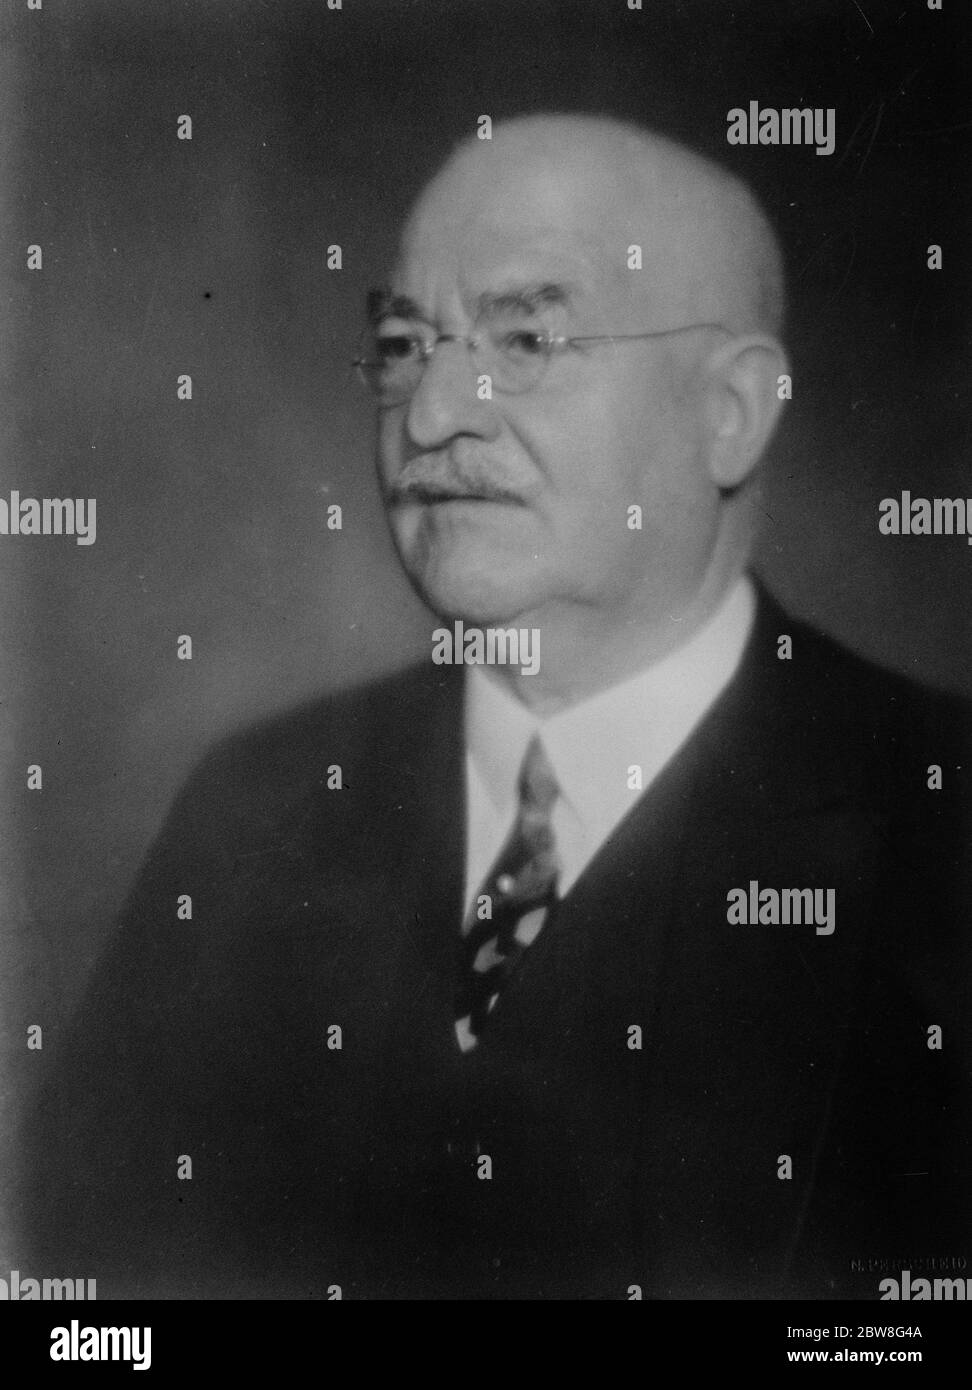 The aspirin man who was born in an attic . Friedrich Carl Duisberg , who was born in an attic and by sheer ability rose to be general director of the great Bayer chemistry firm . 28 May 1930 Stock Photo